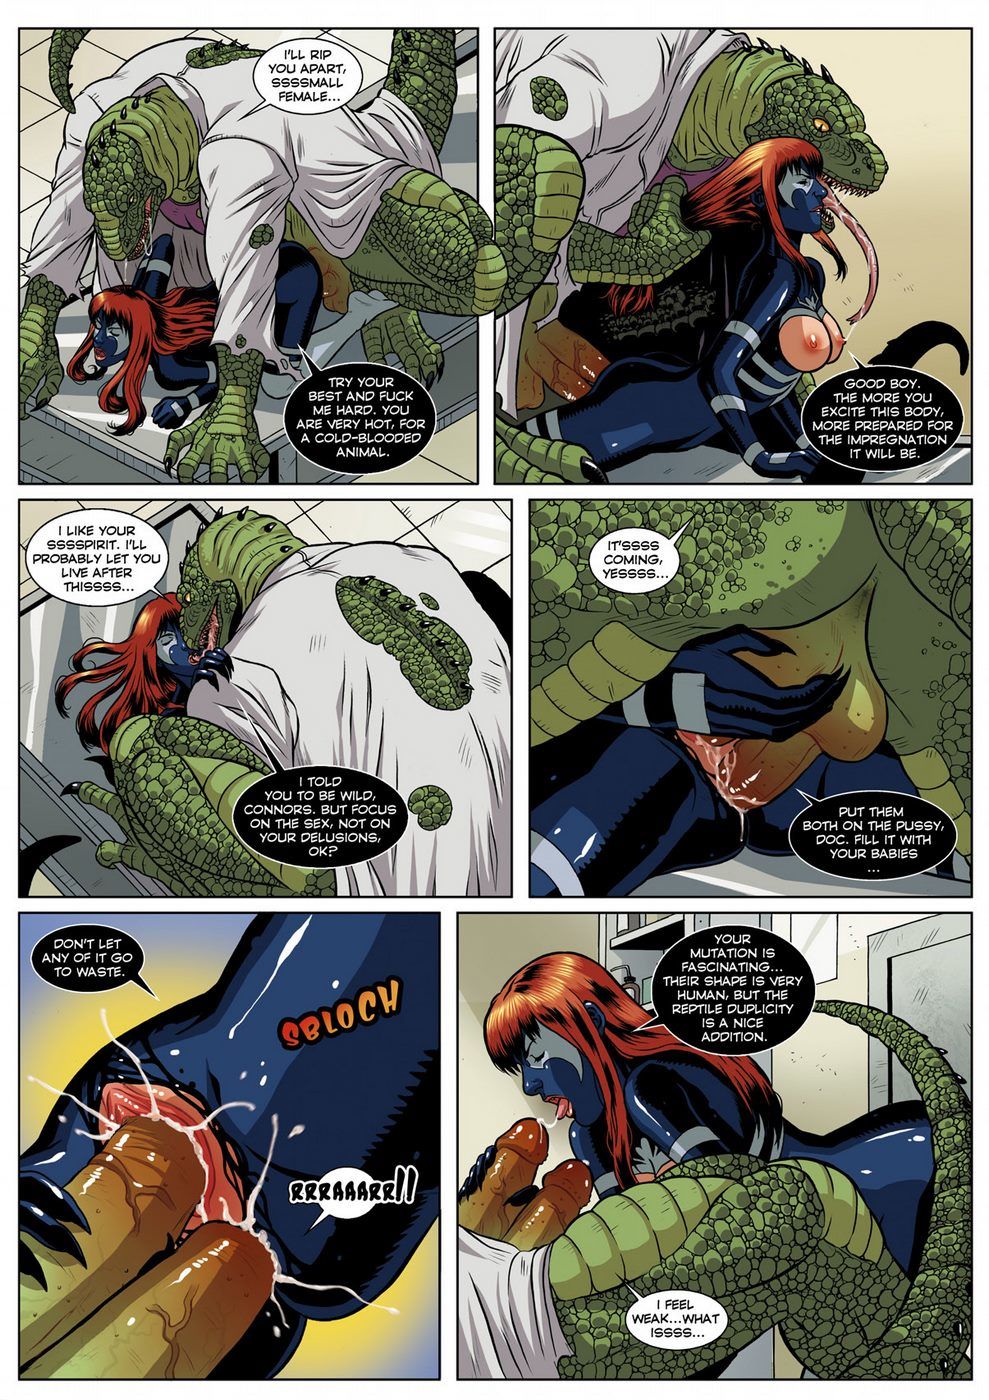 Spider-Man Sexual Symbiosis 1 page 16